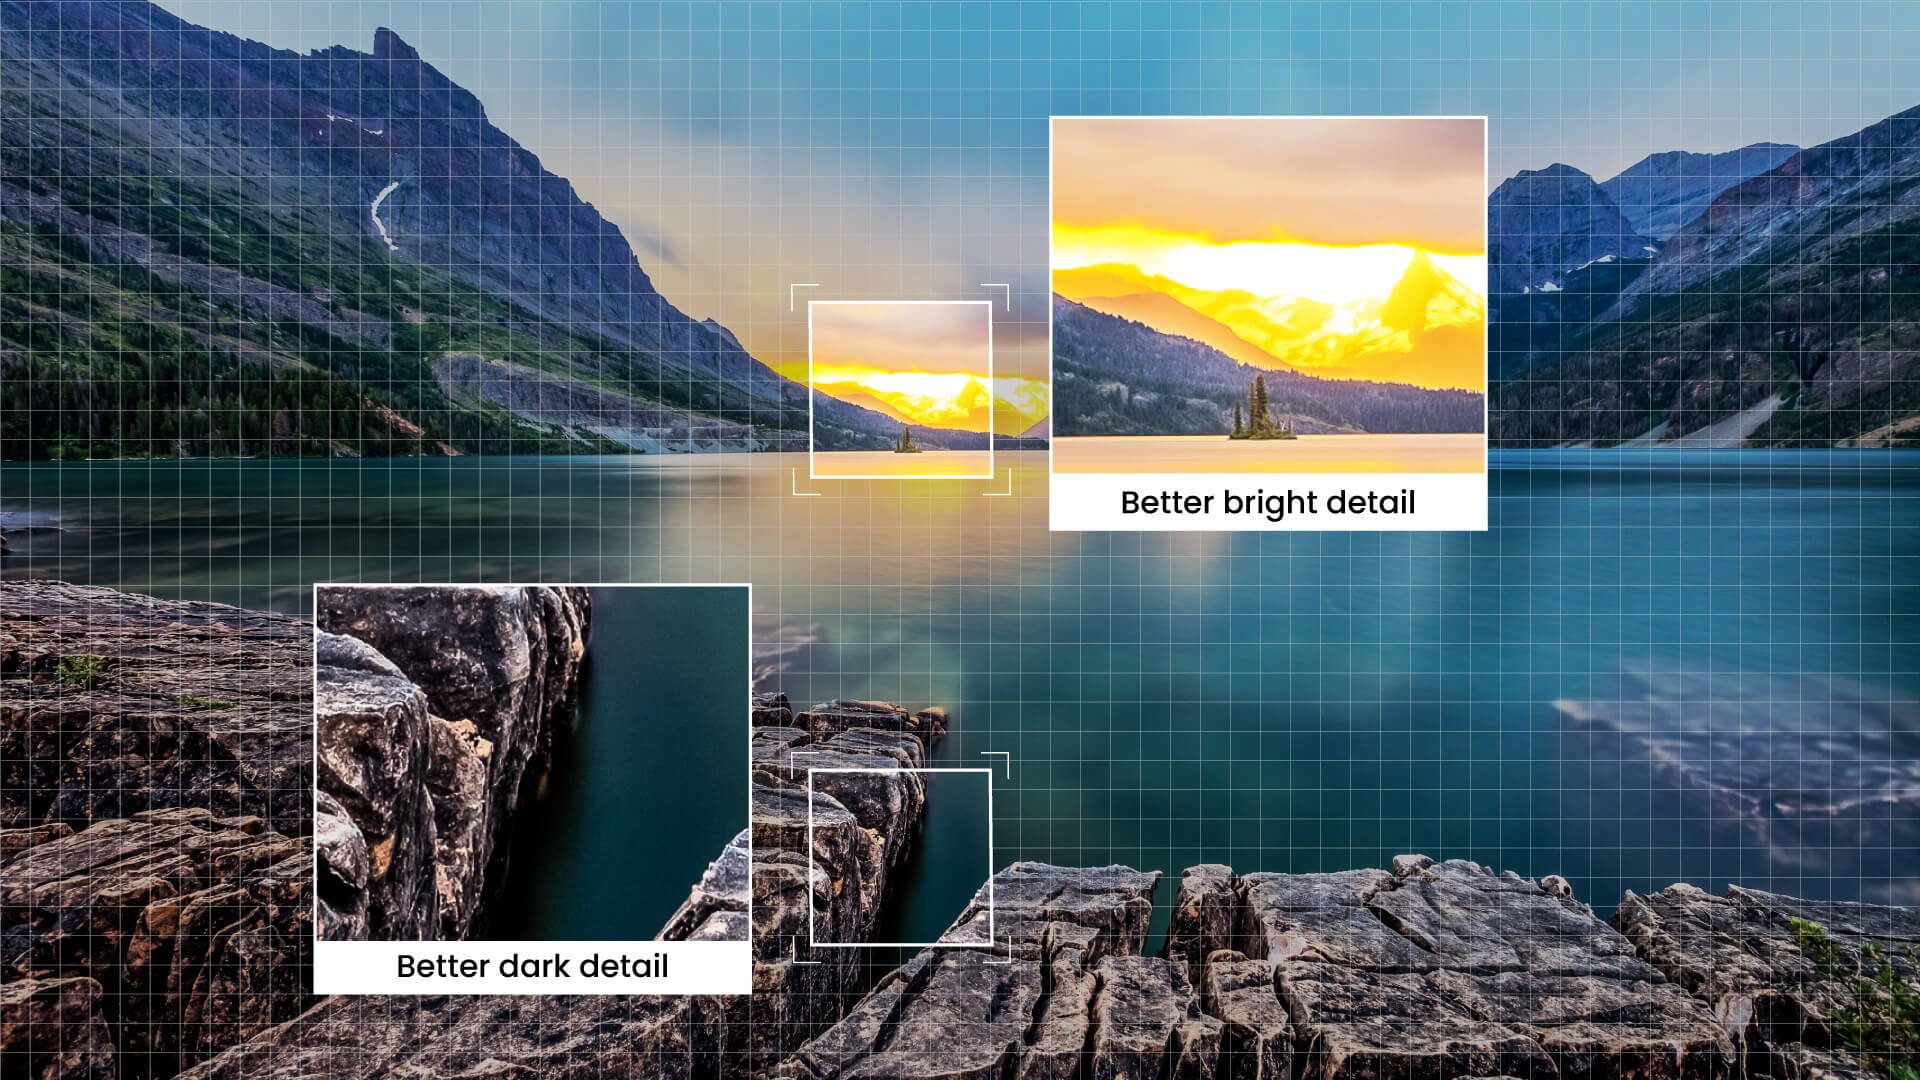 W5800 applying the industry-leading Local Contrast Enhancer (LCE) algorithm for greater dark and bright details